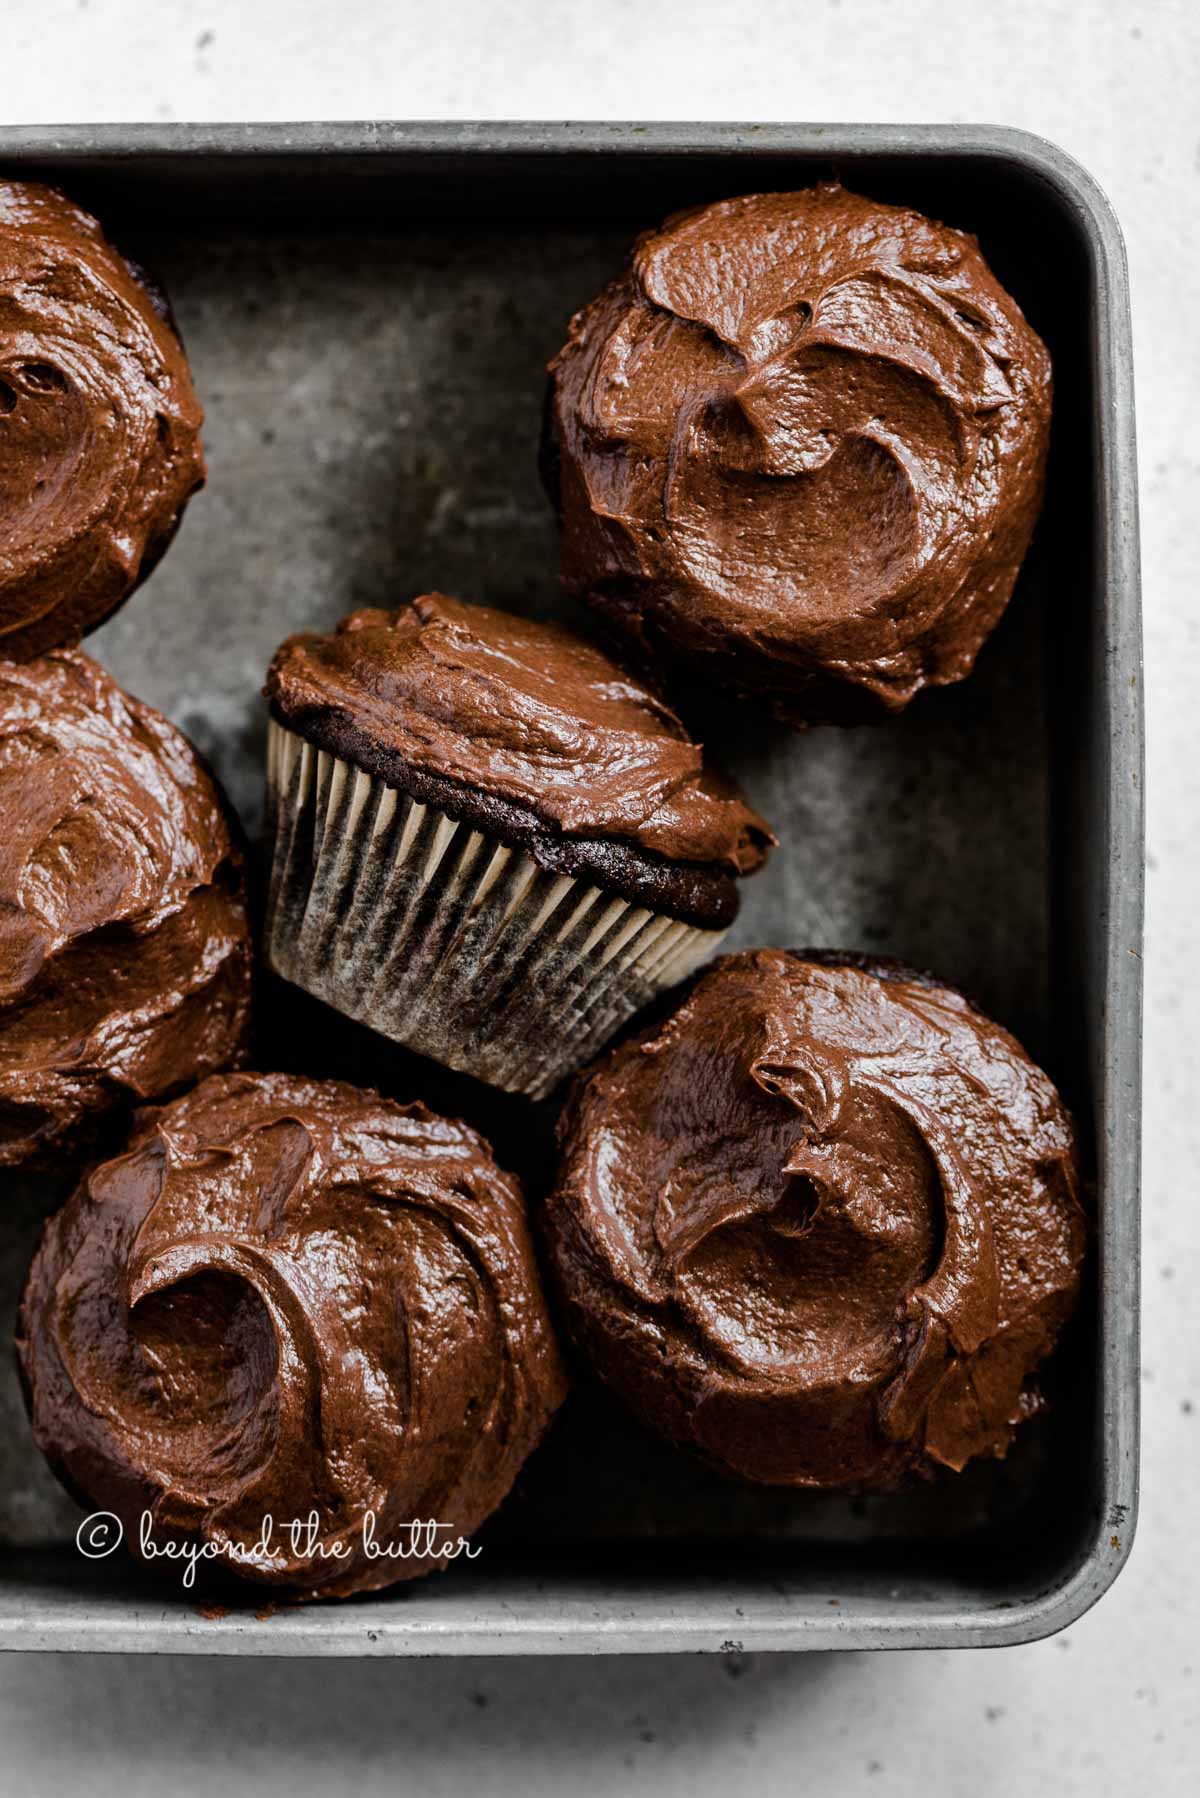 Overhead image of small batch chocolate cupcakes in vintage metal baking tin with one on its side | All Images © Beyond the Butter™